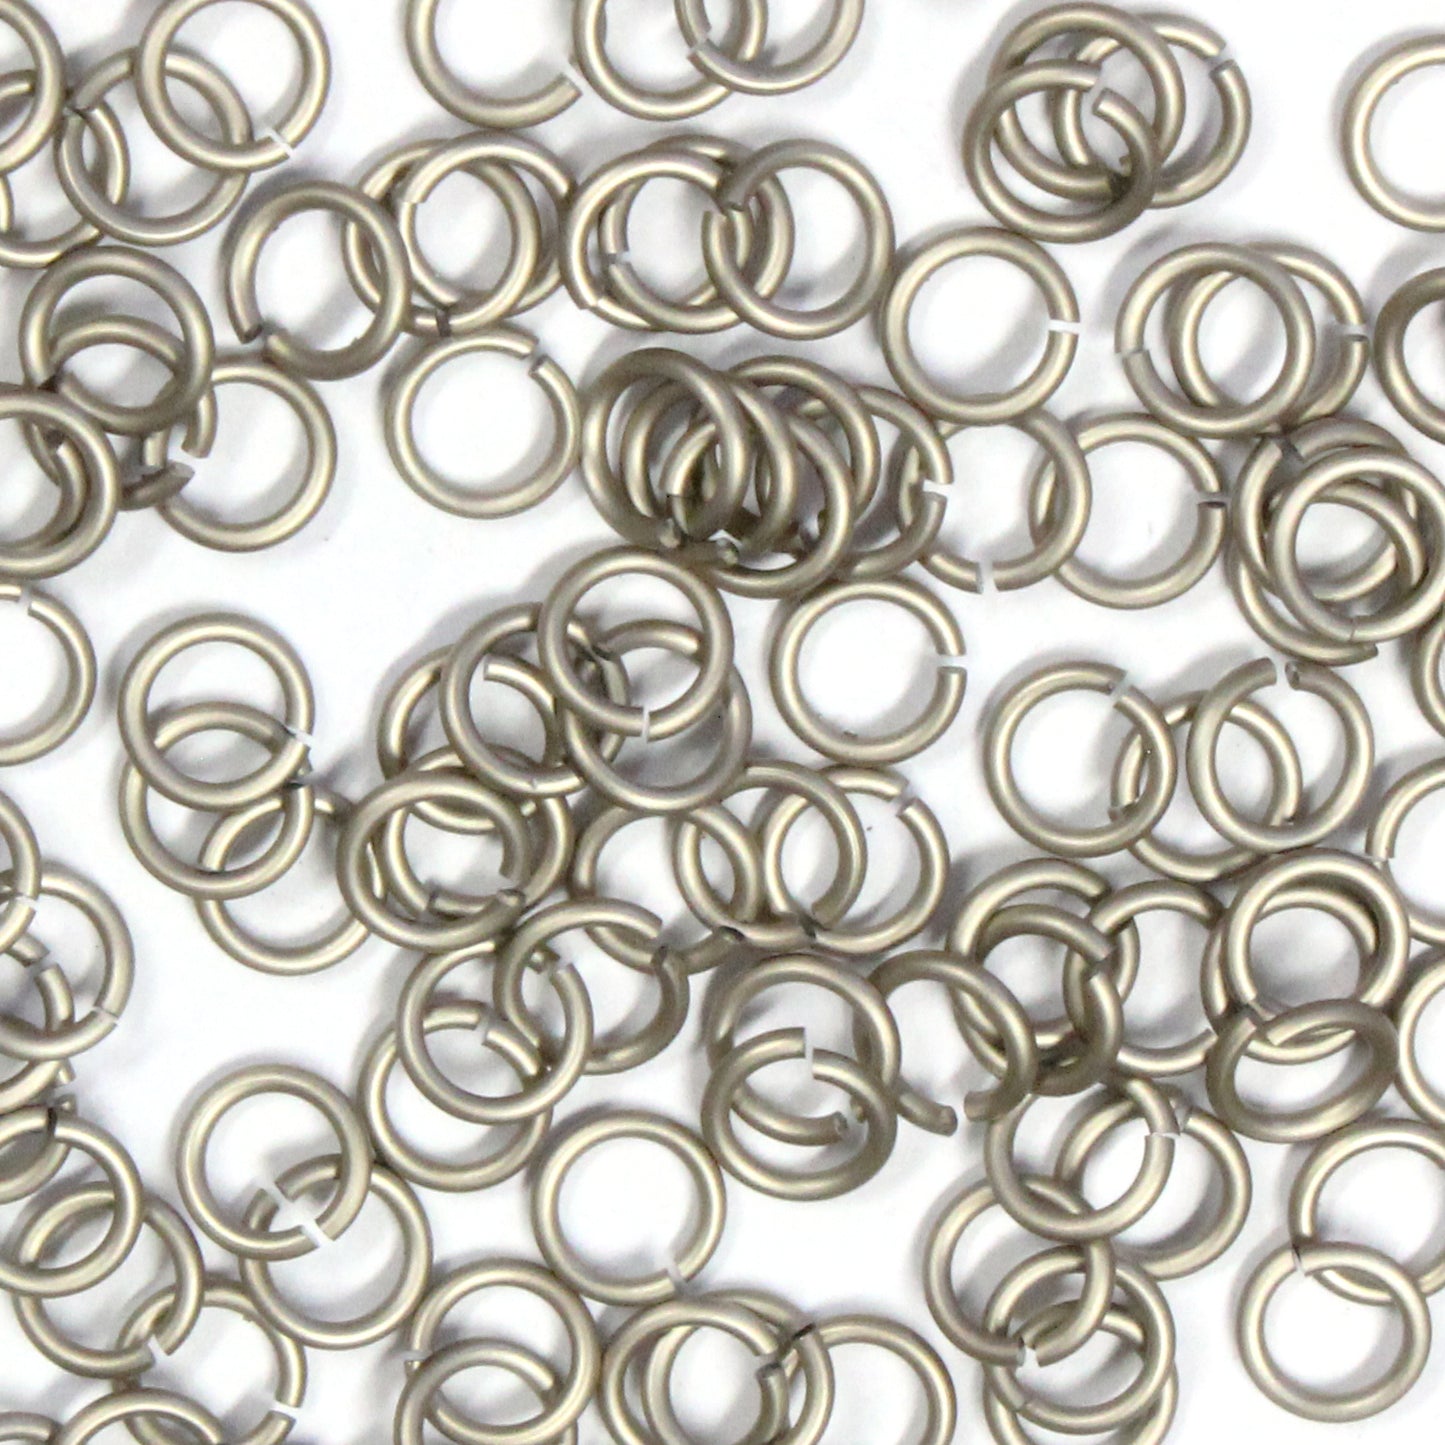 MATTE CHAMPAGNE 4mm 18 GA AWG Jump Rings / 5 Gram Pack (approx 150) / sawcut round open anodized aluminum